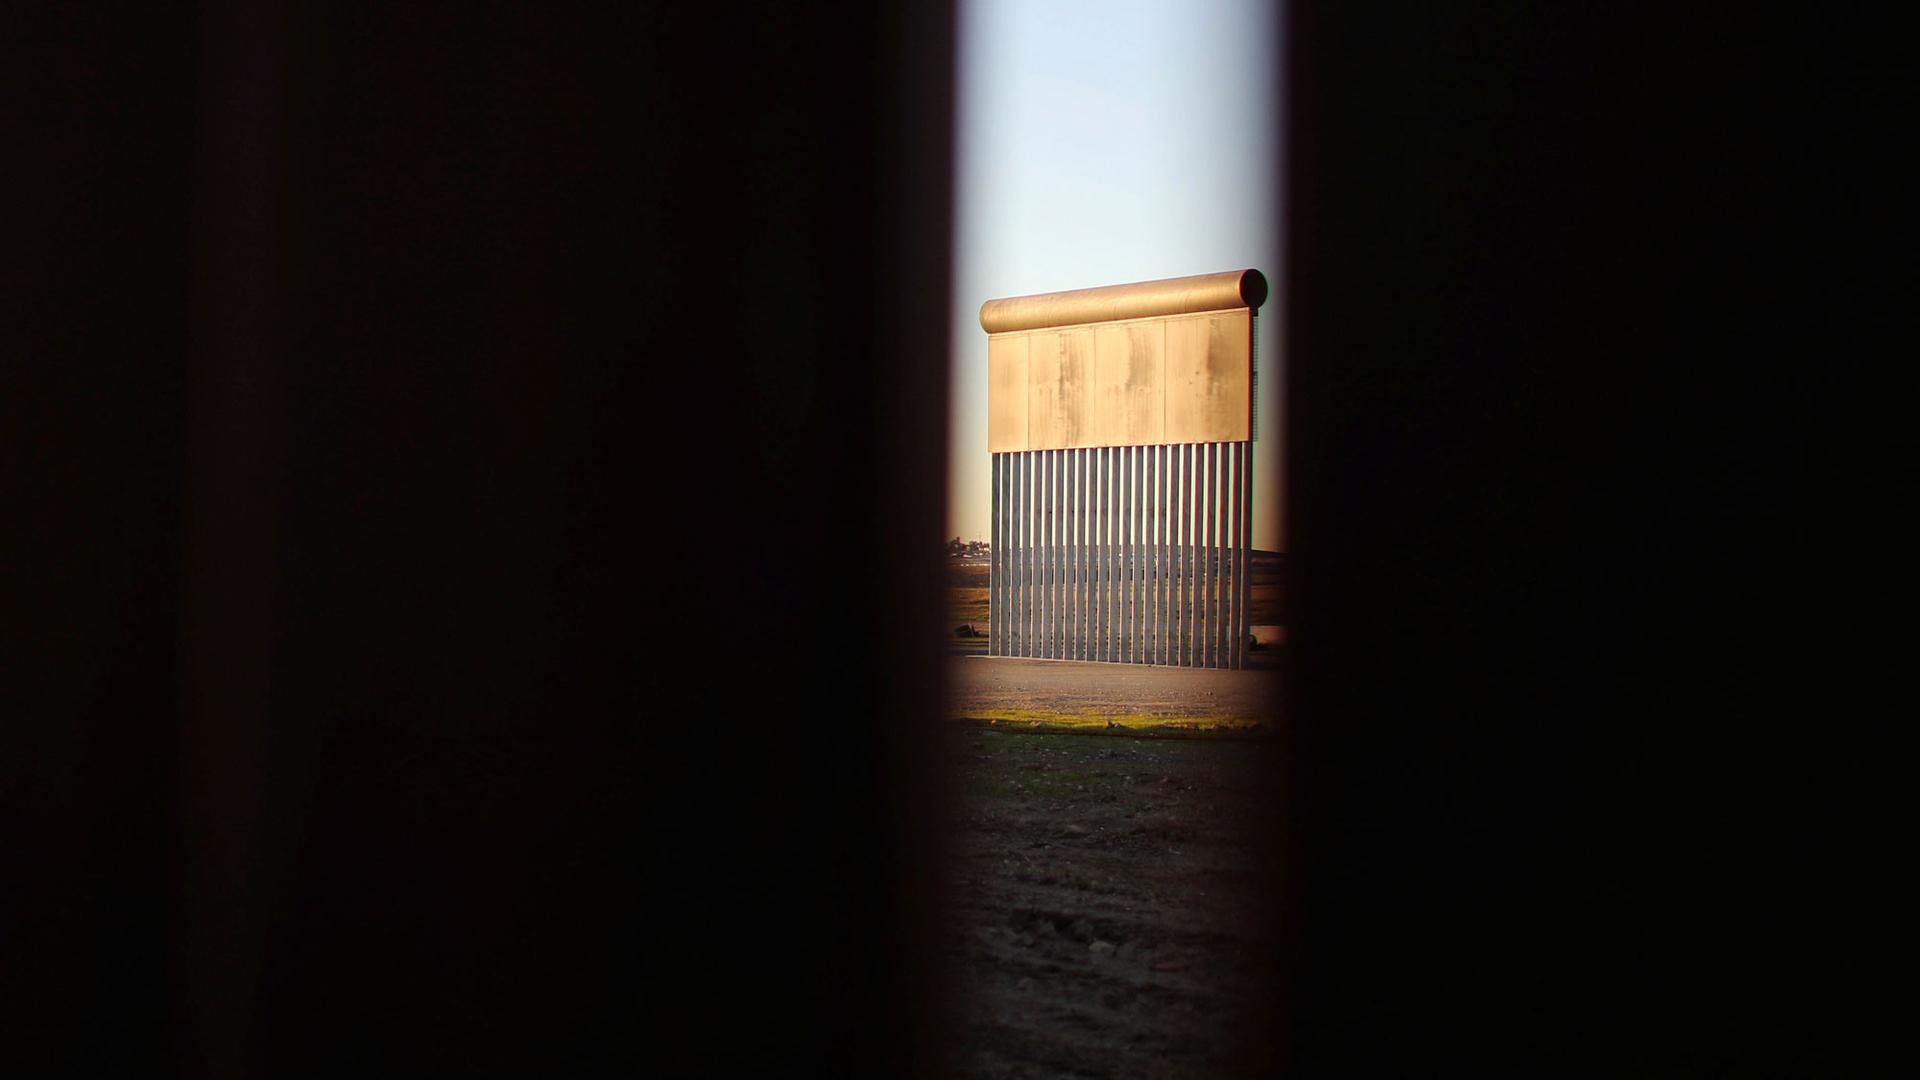 A slatted metal prototypes of a border wall is shown, photographed through the border wall in Tijuana, Mexico.